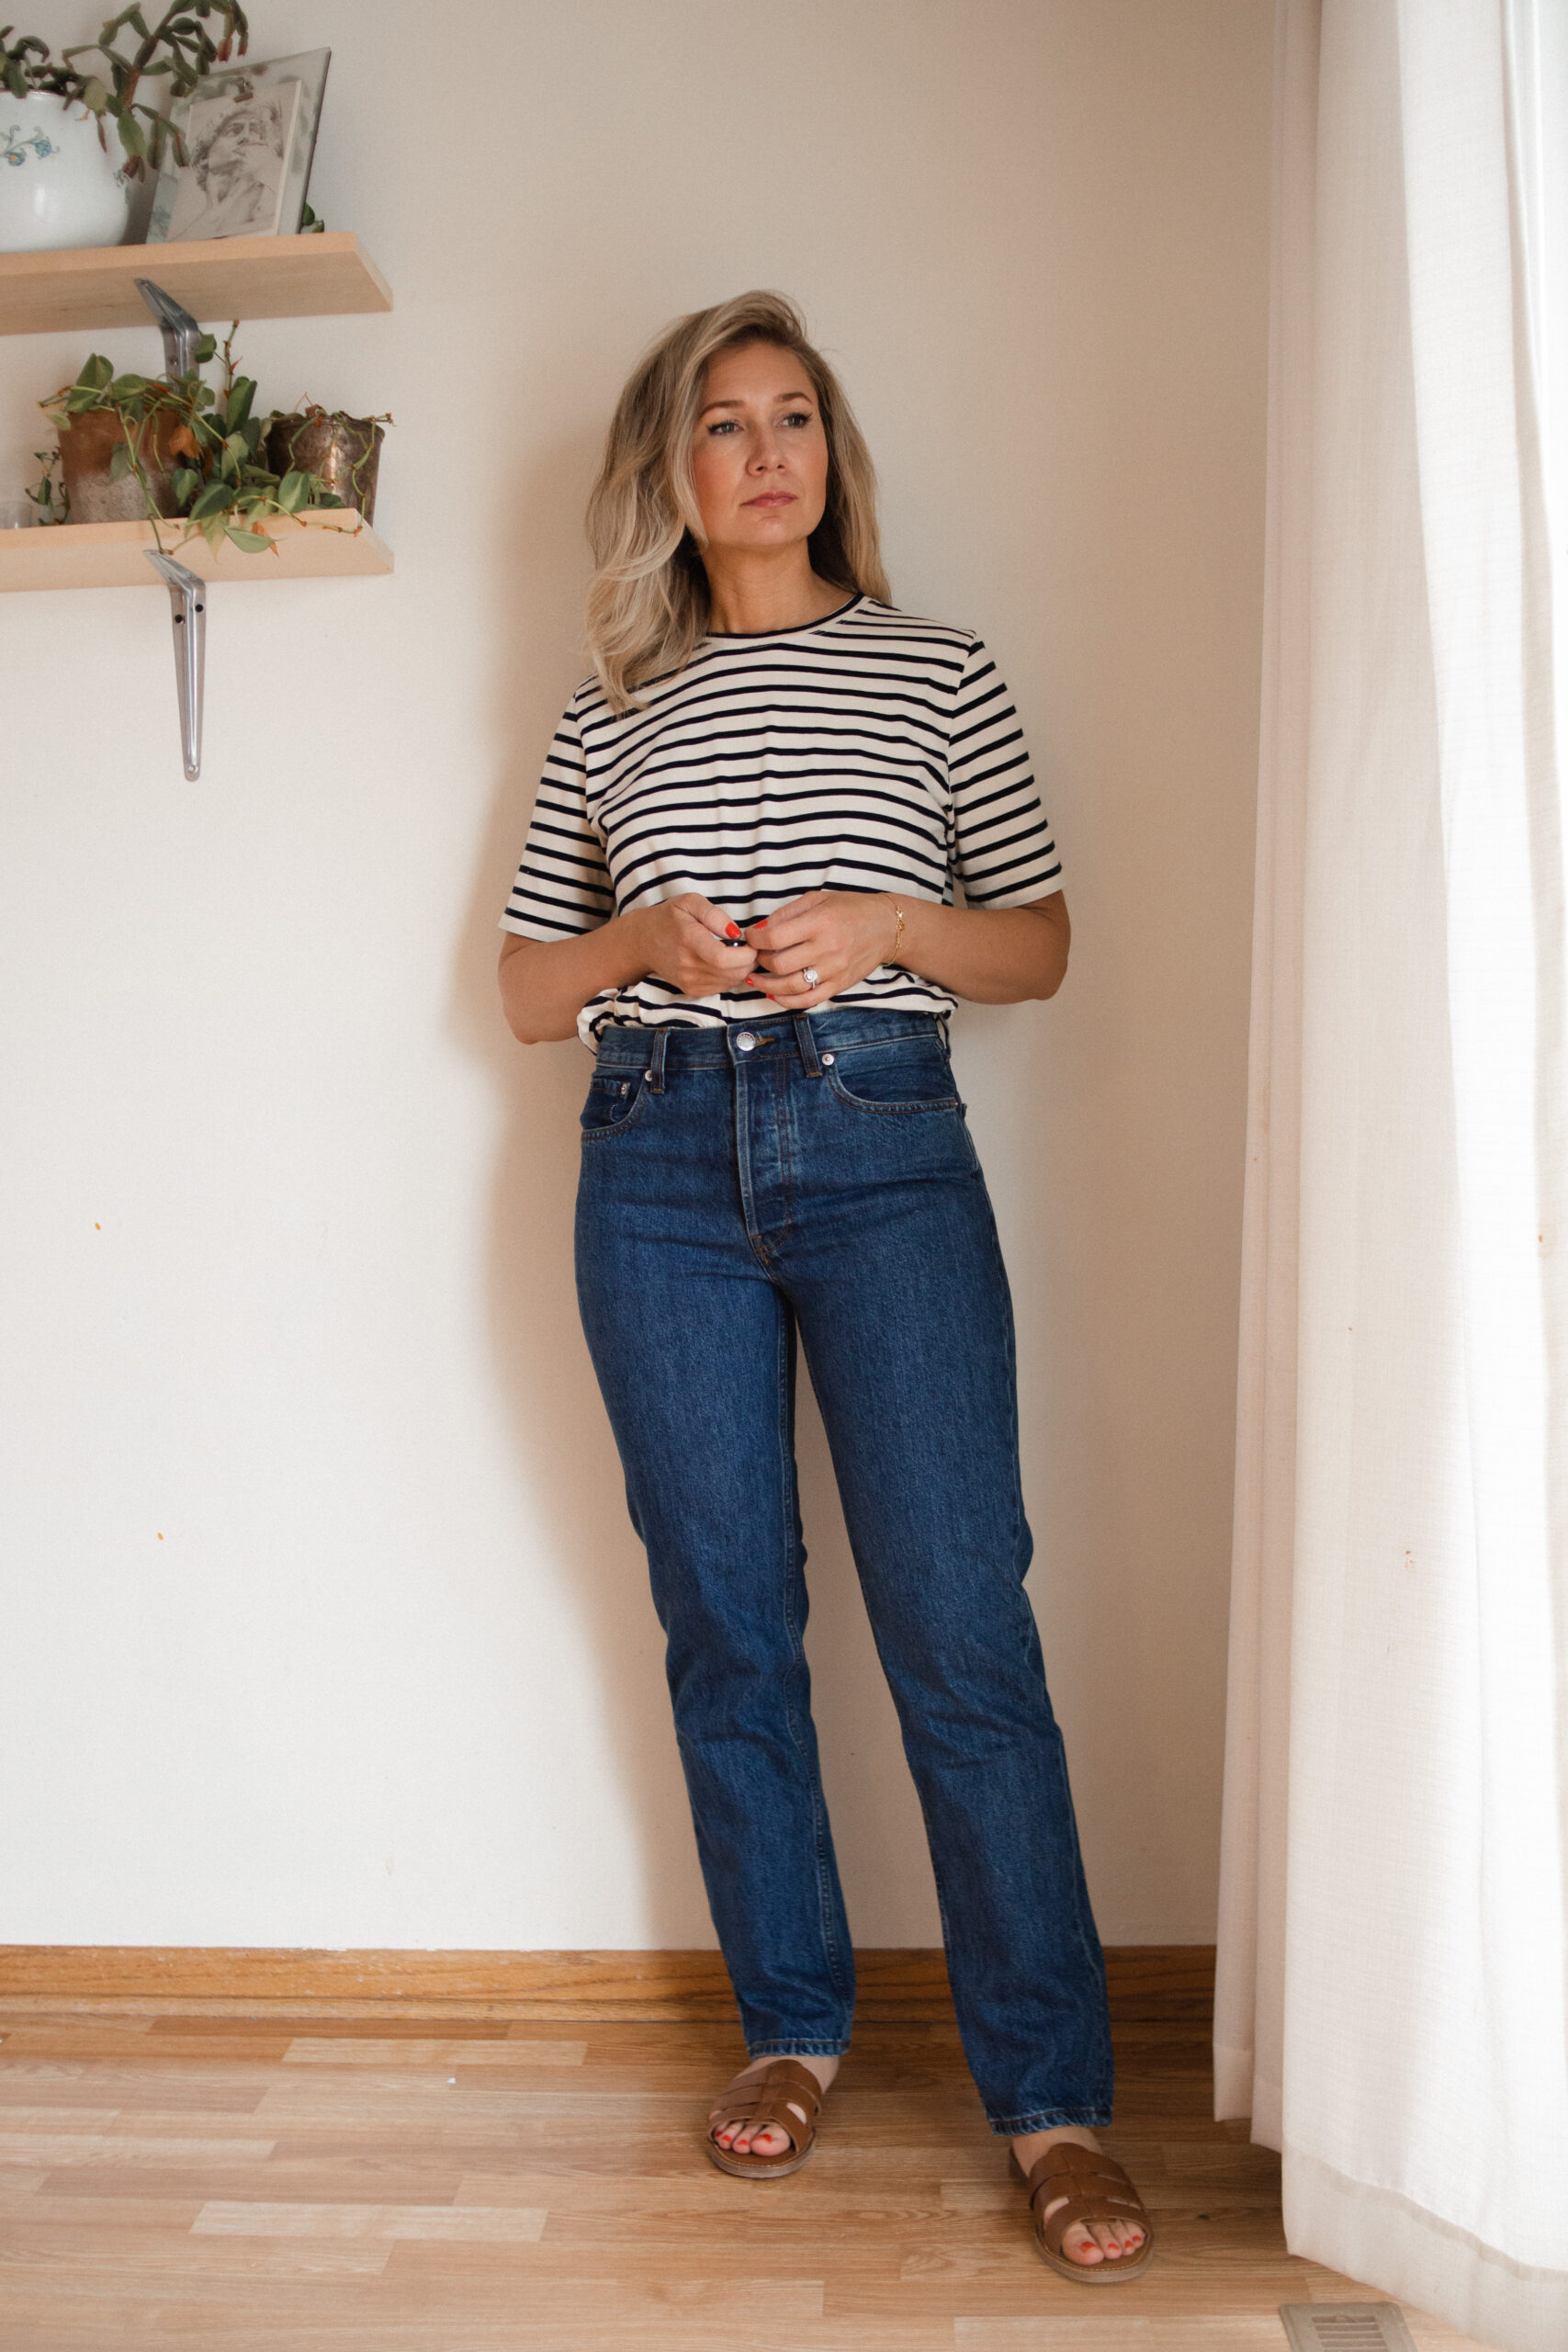 Karin Emily wears the Everlane everyone vintage jeansa, a pair of brown sandals nd a black and white tee